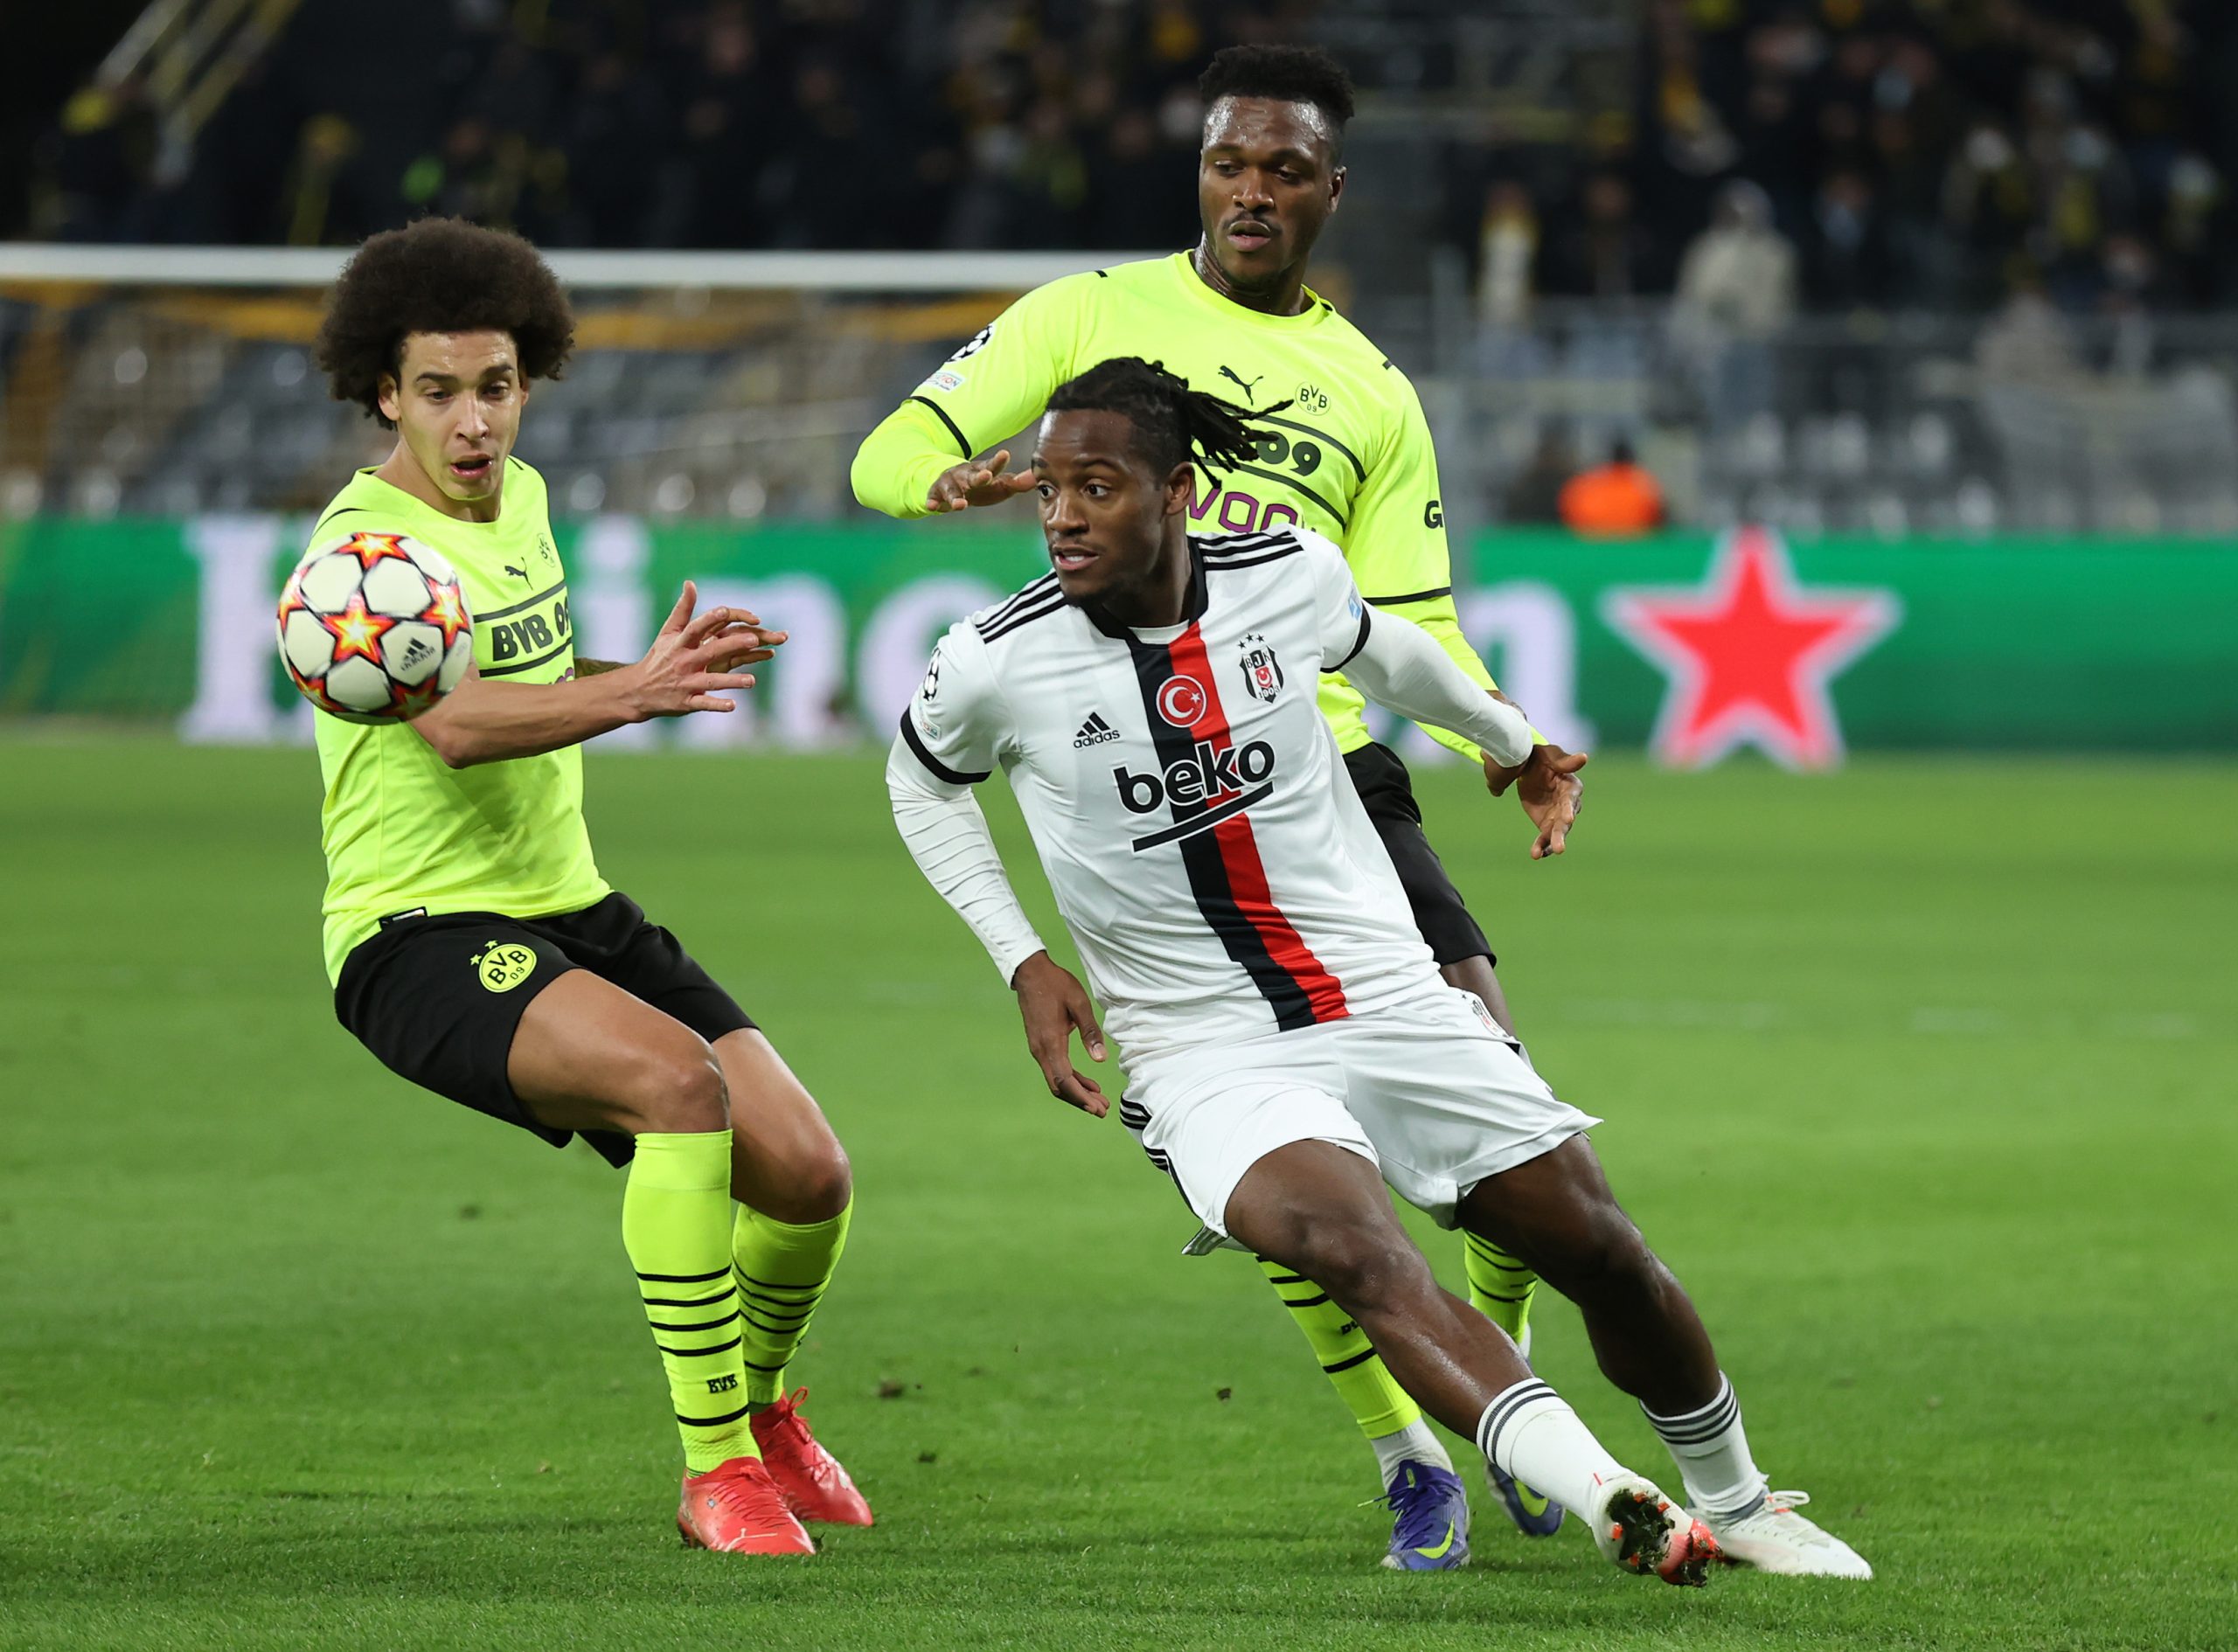 Transfer News: Leeds United are interested in signing Chelsea striker Michy Batshuayi.